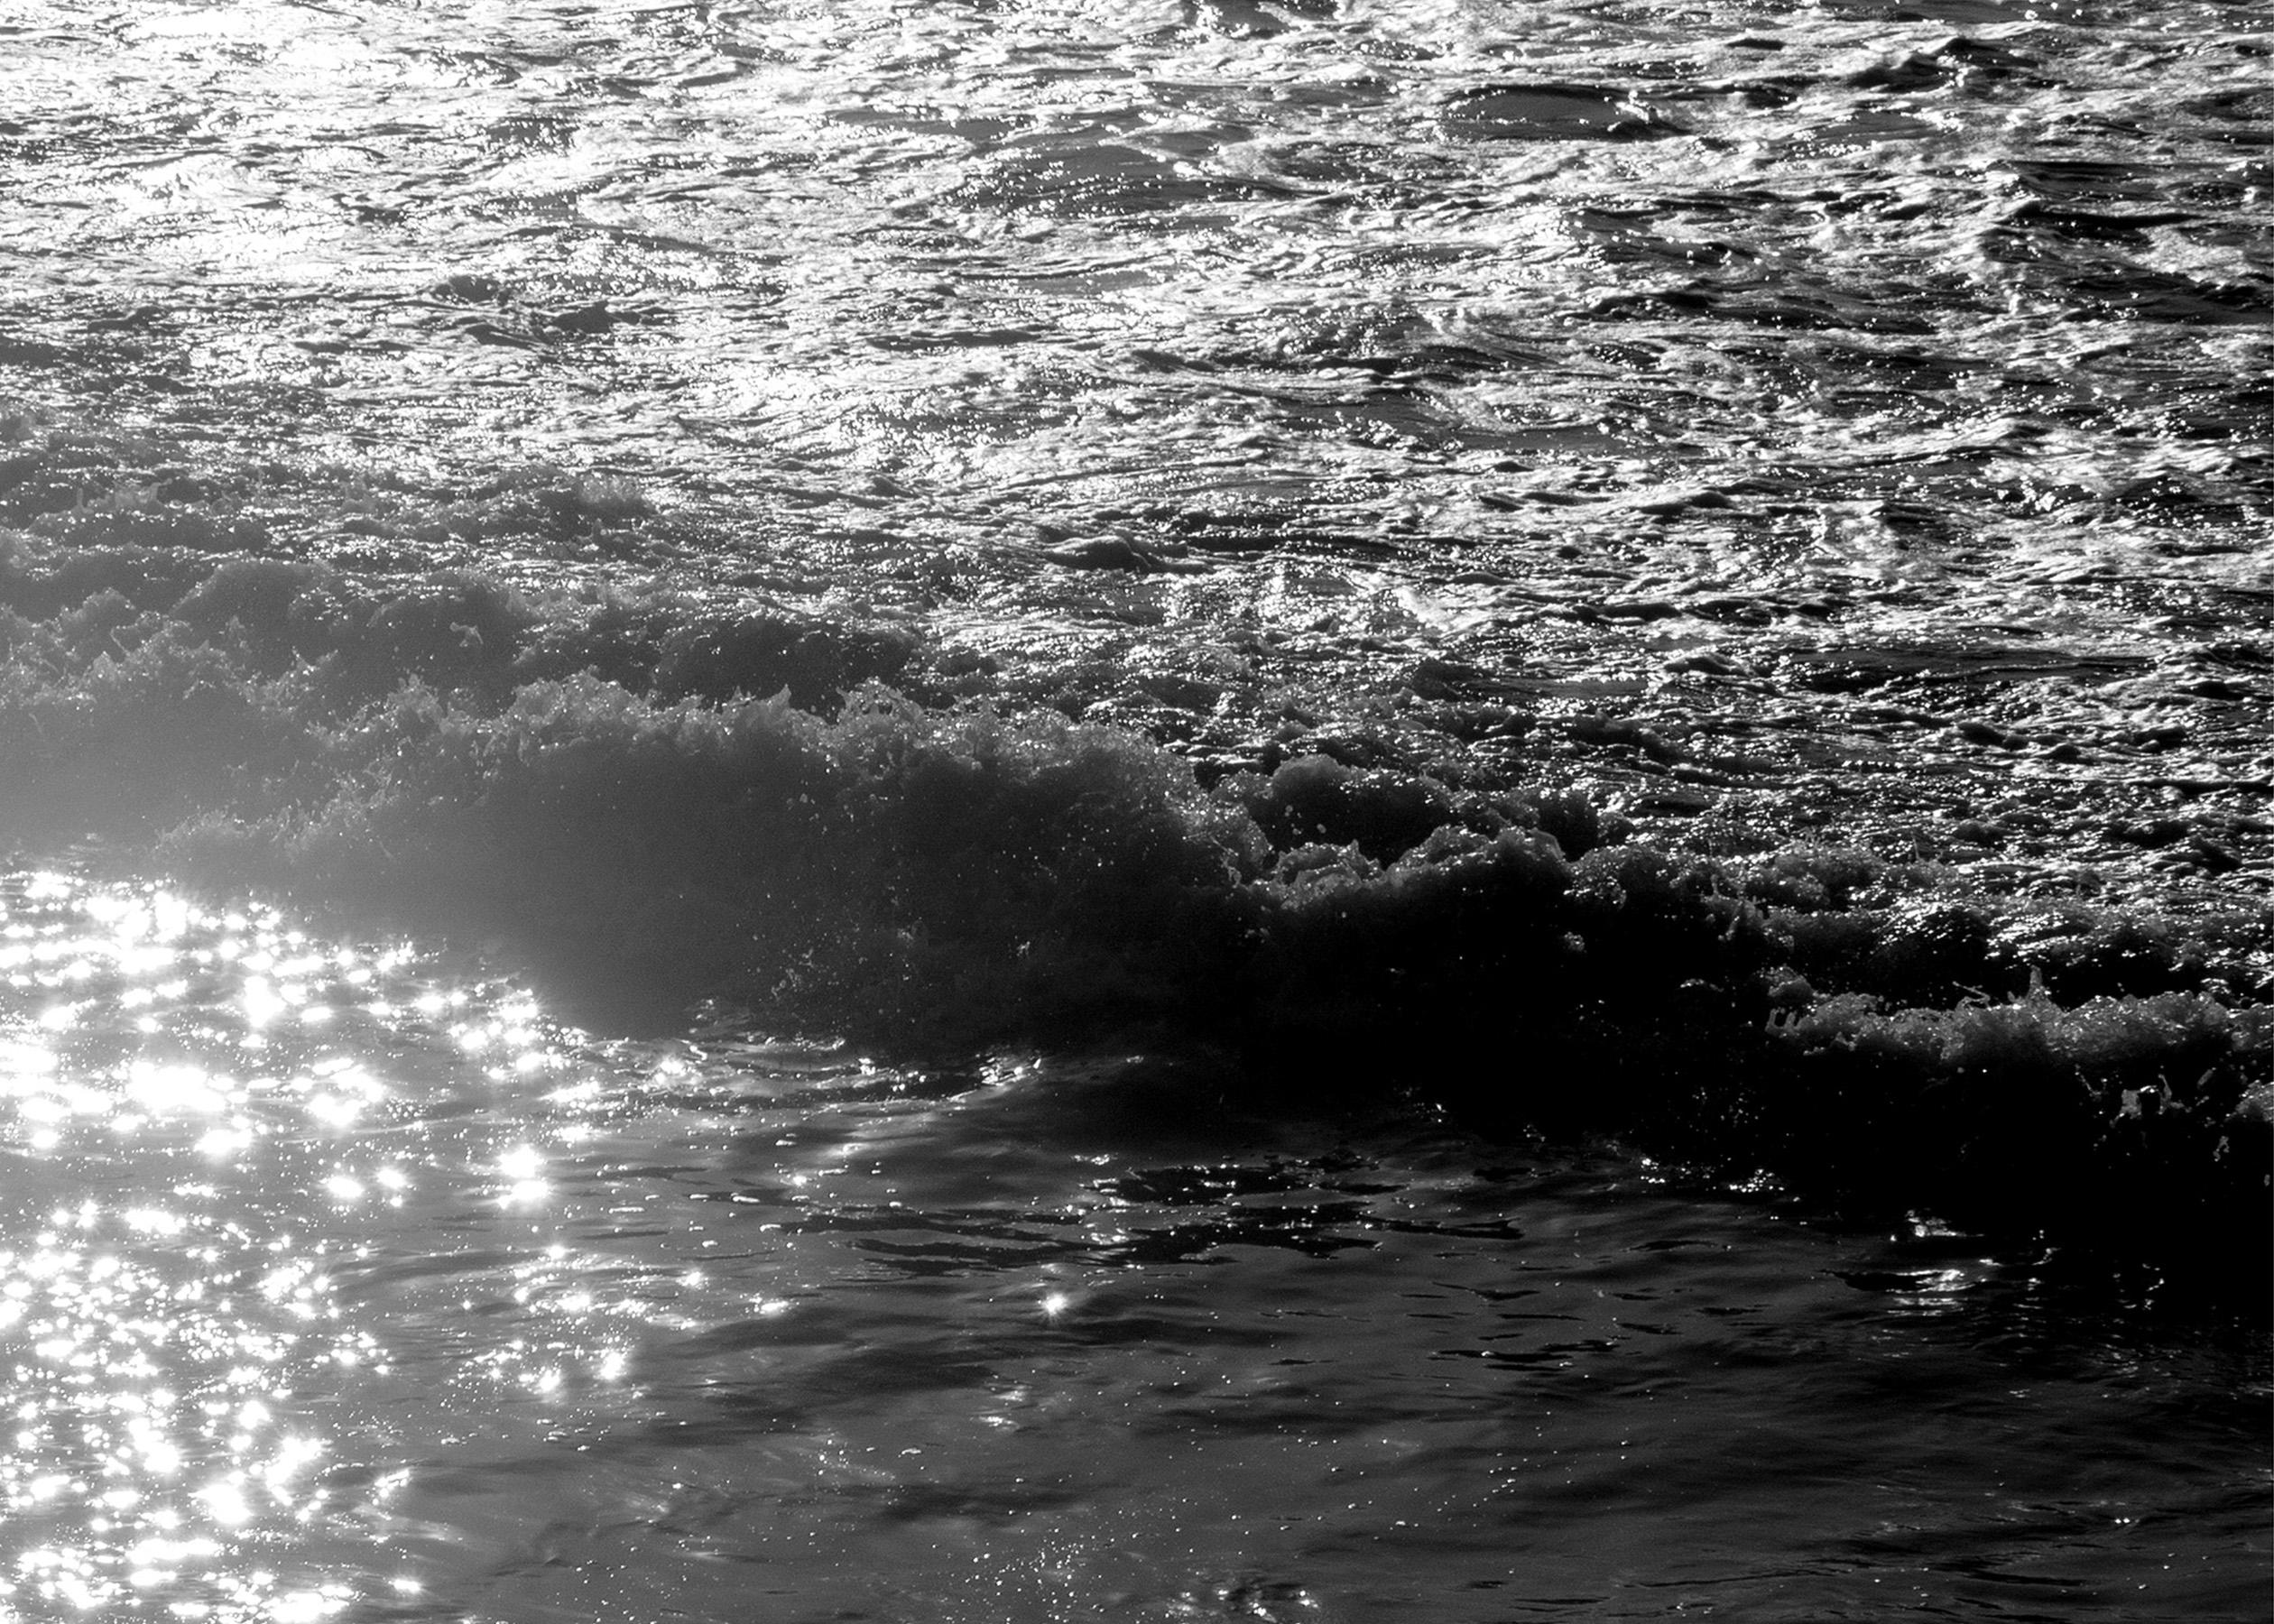 Water Reflection, Seascape Black and White Giclée Print, Pacific Sunset Waves For Sale 1